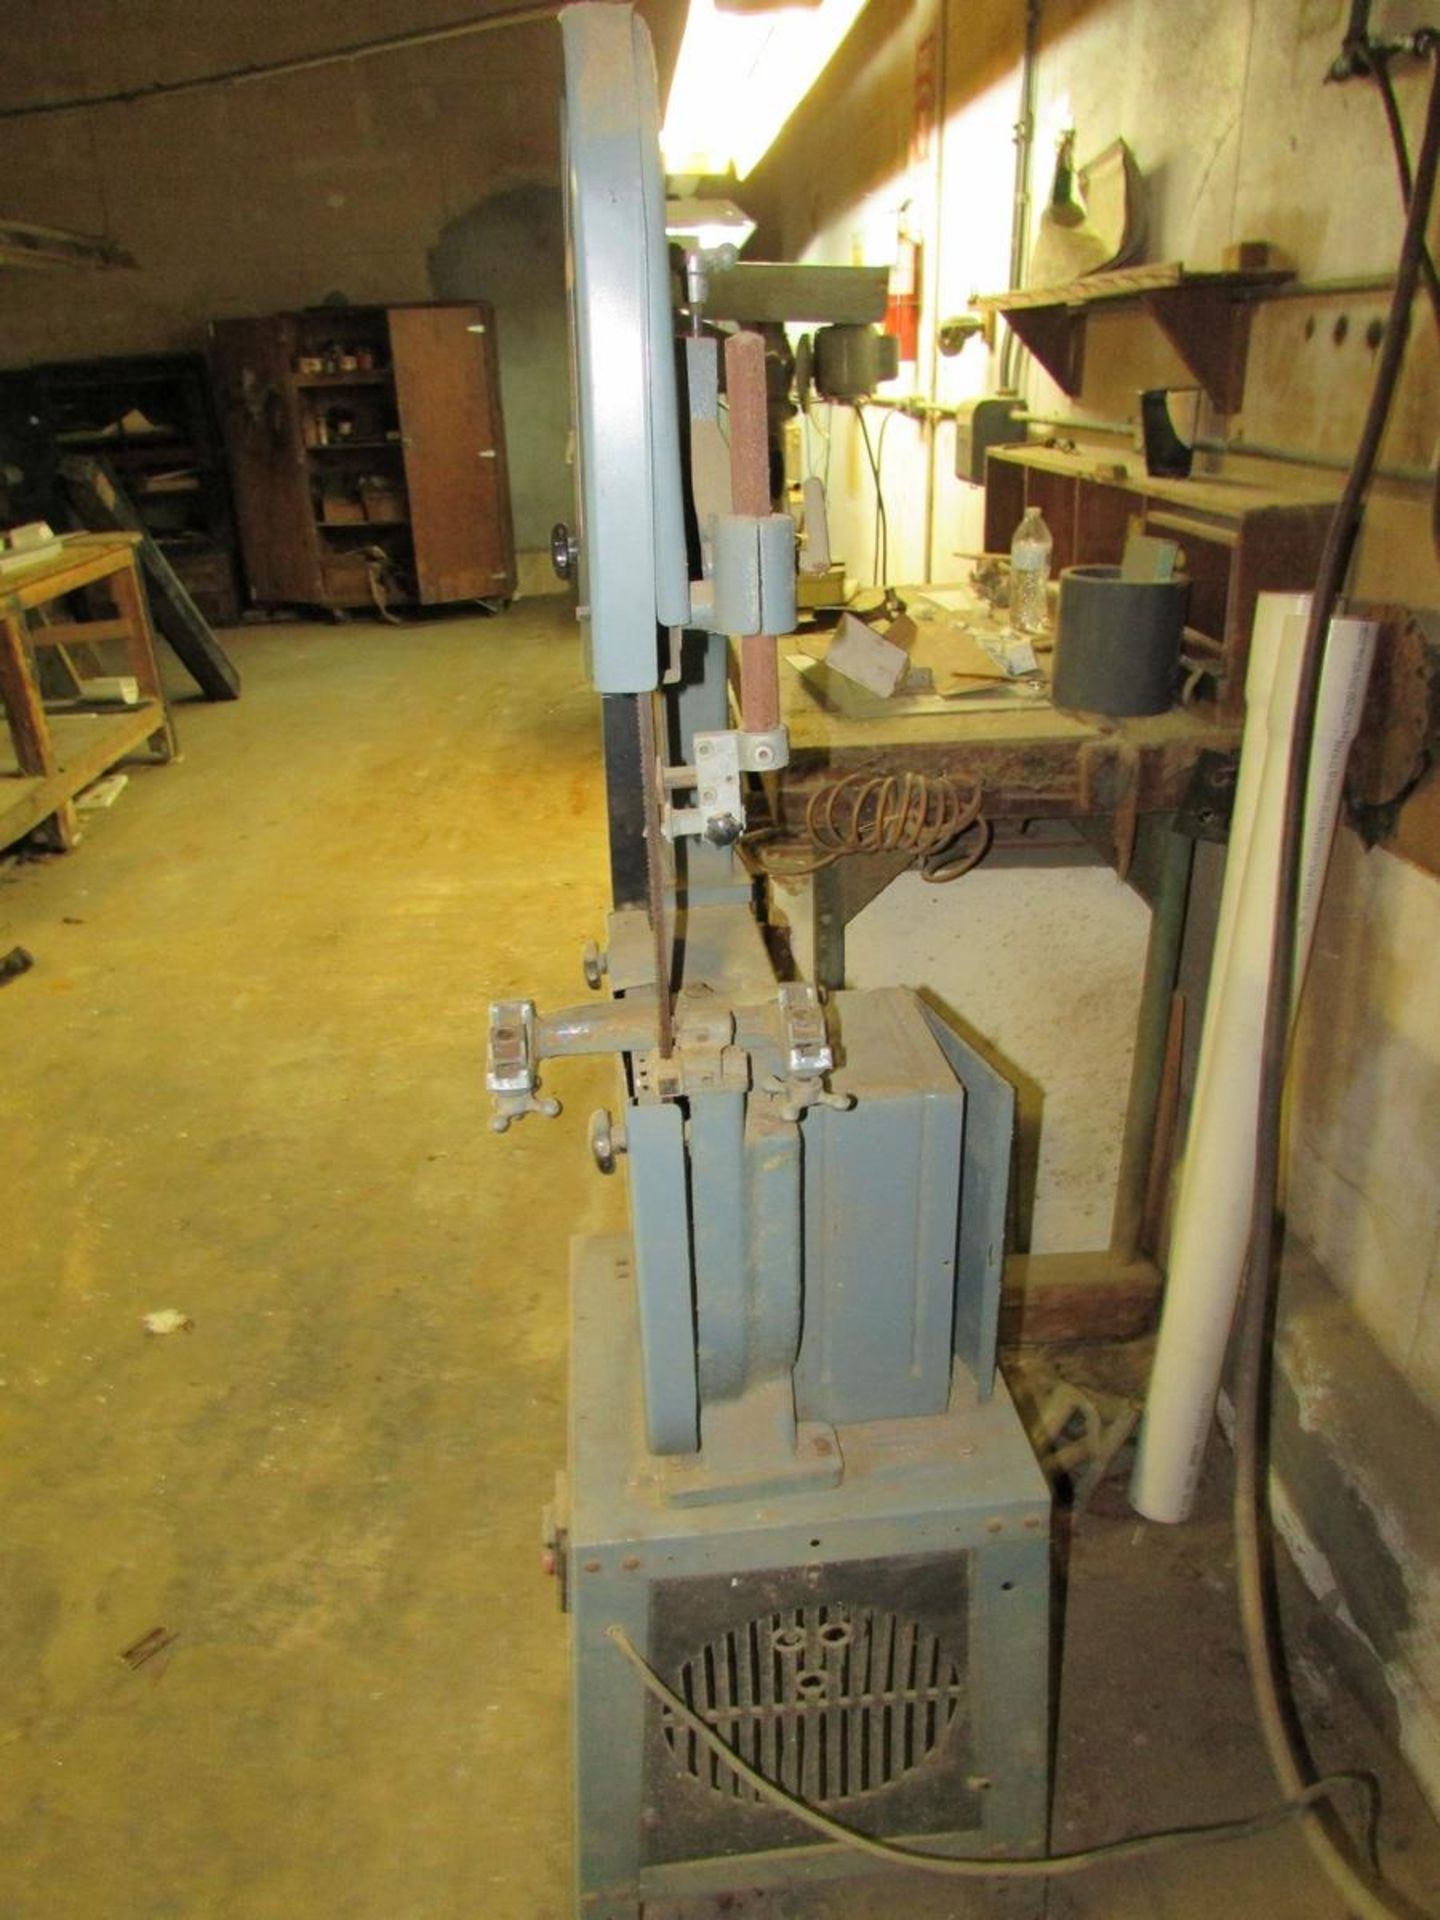 Enco 199-9005 Vertical Bandsaw, 14" Throat, No Table, Variable Band Speed, 115V, S/N: 0060044 - Image 3 of 8